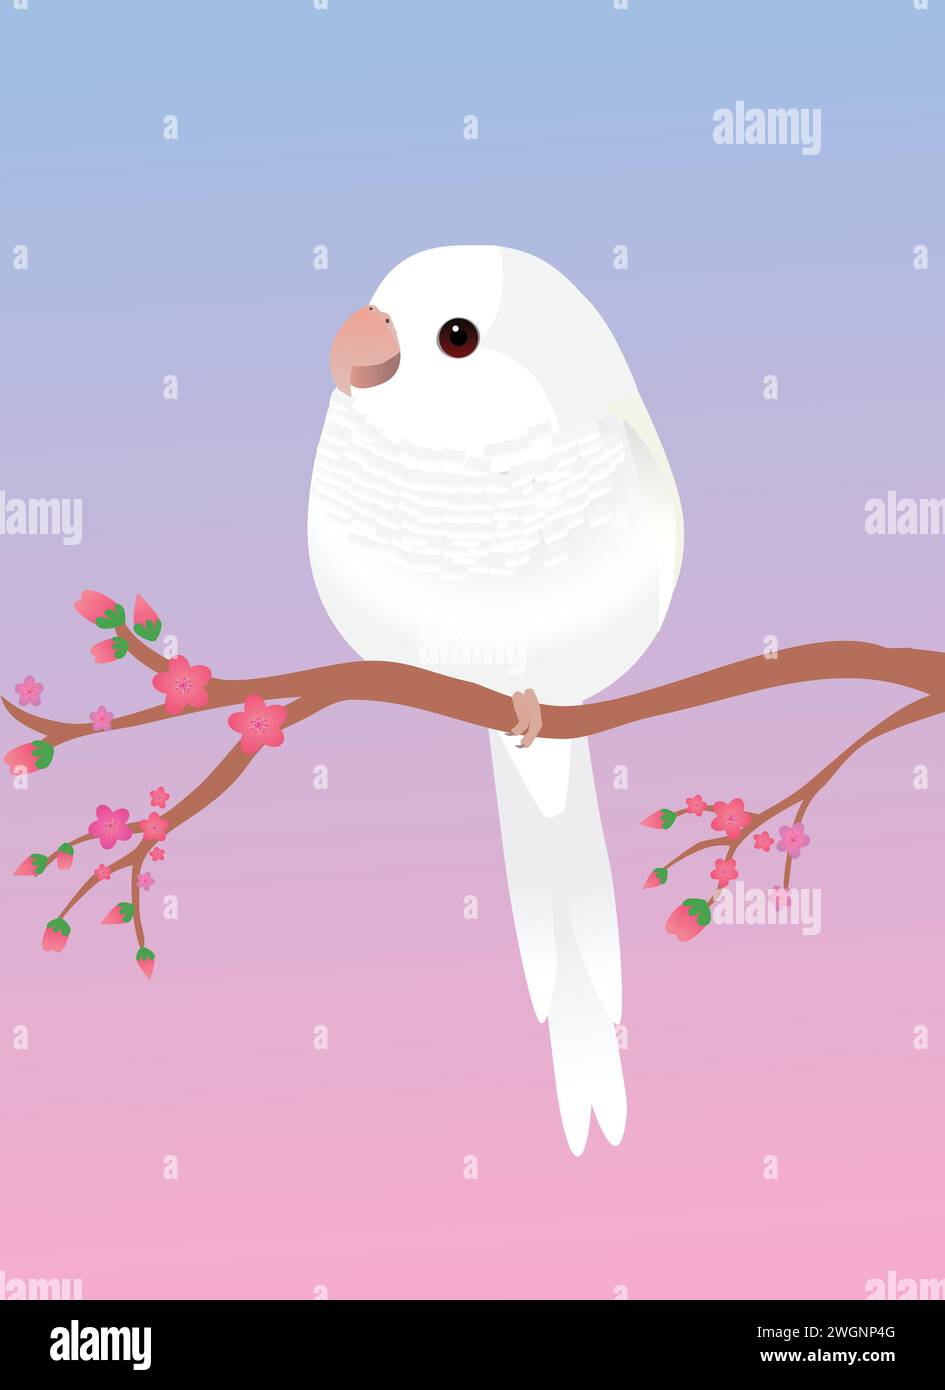 A very cute albino quaker parrot or monk parakeet in the shape of an egg. Soft pink gradient background. The bird is perched on a branch with pink bl Stock Vector